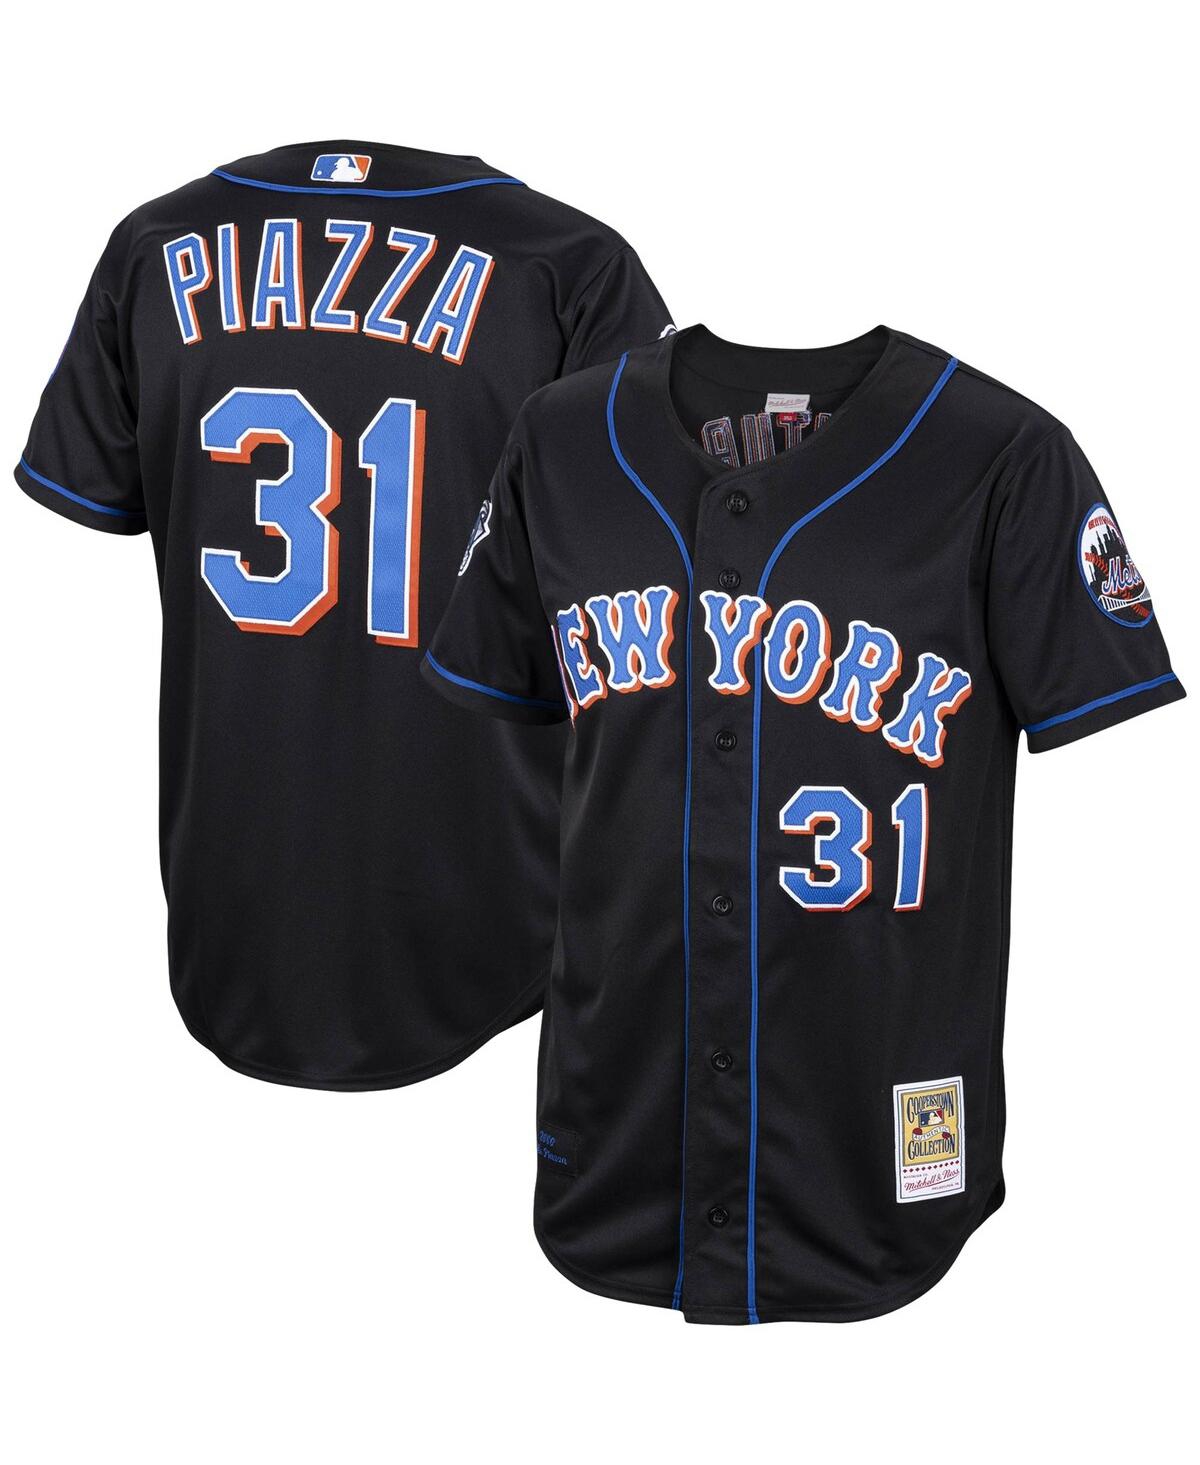 Men's Mitchell & Ness Mike Piazza Black New York Mets Alternate 2000 Cooperstown Collection Authentic Jersey - Black